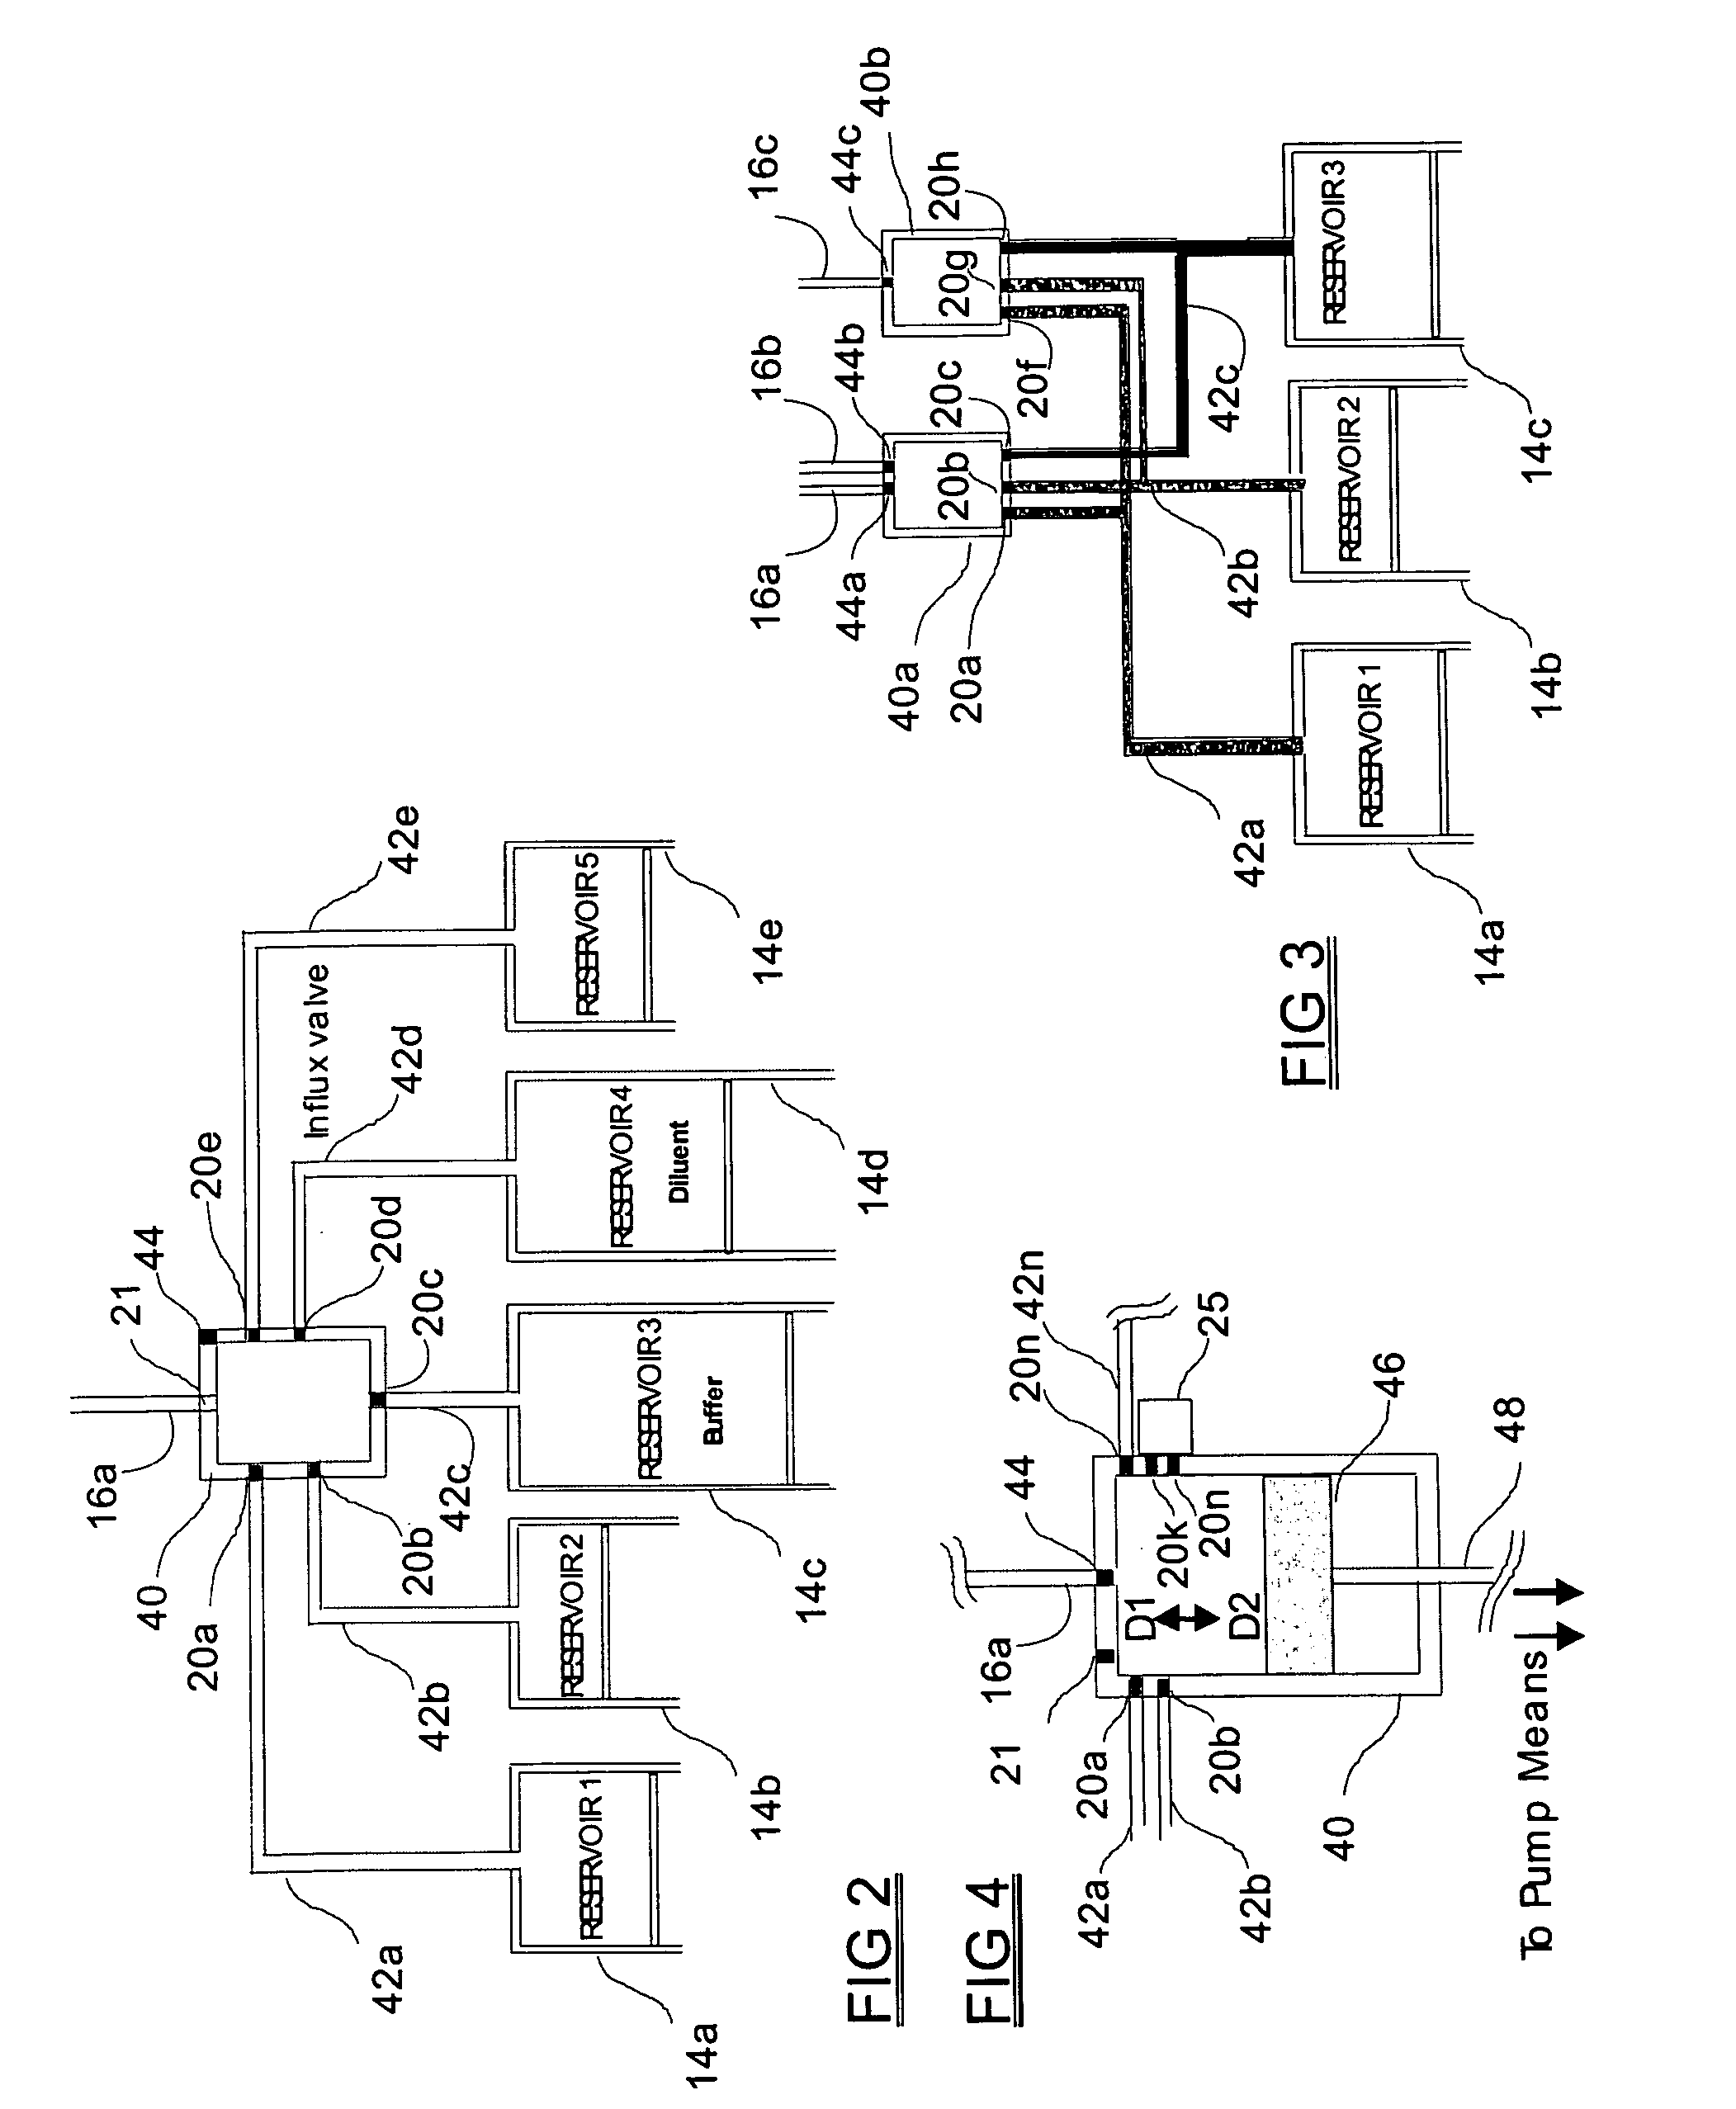 Programmable medical drug delivery systems and methods for delivery of multiple fluids and concentrations